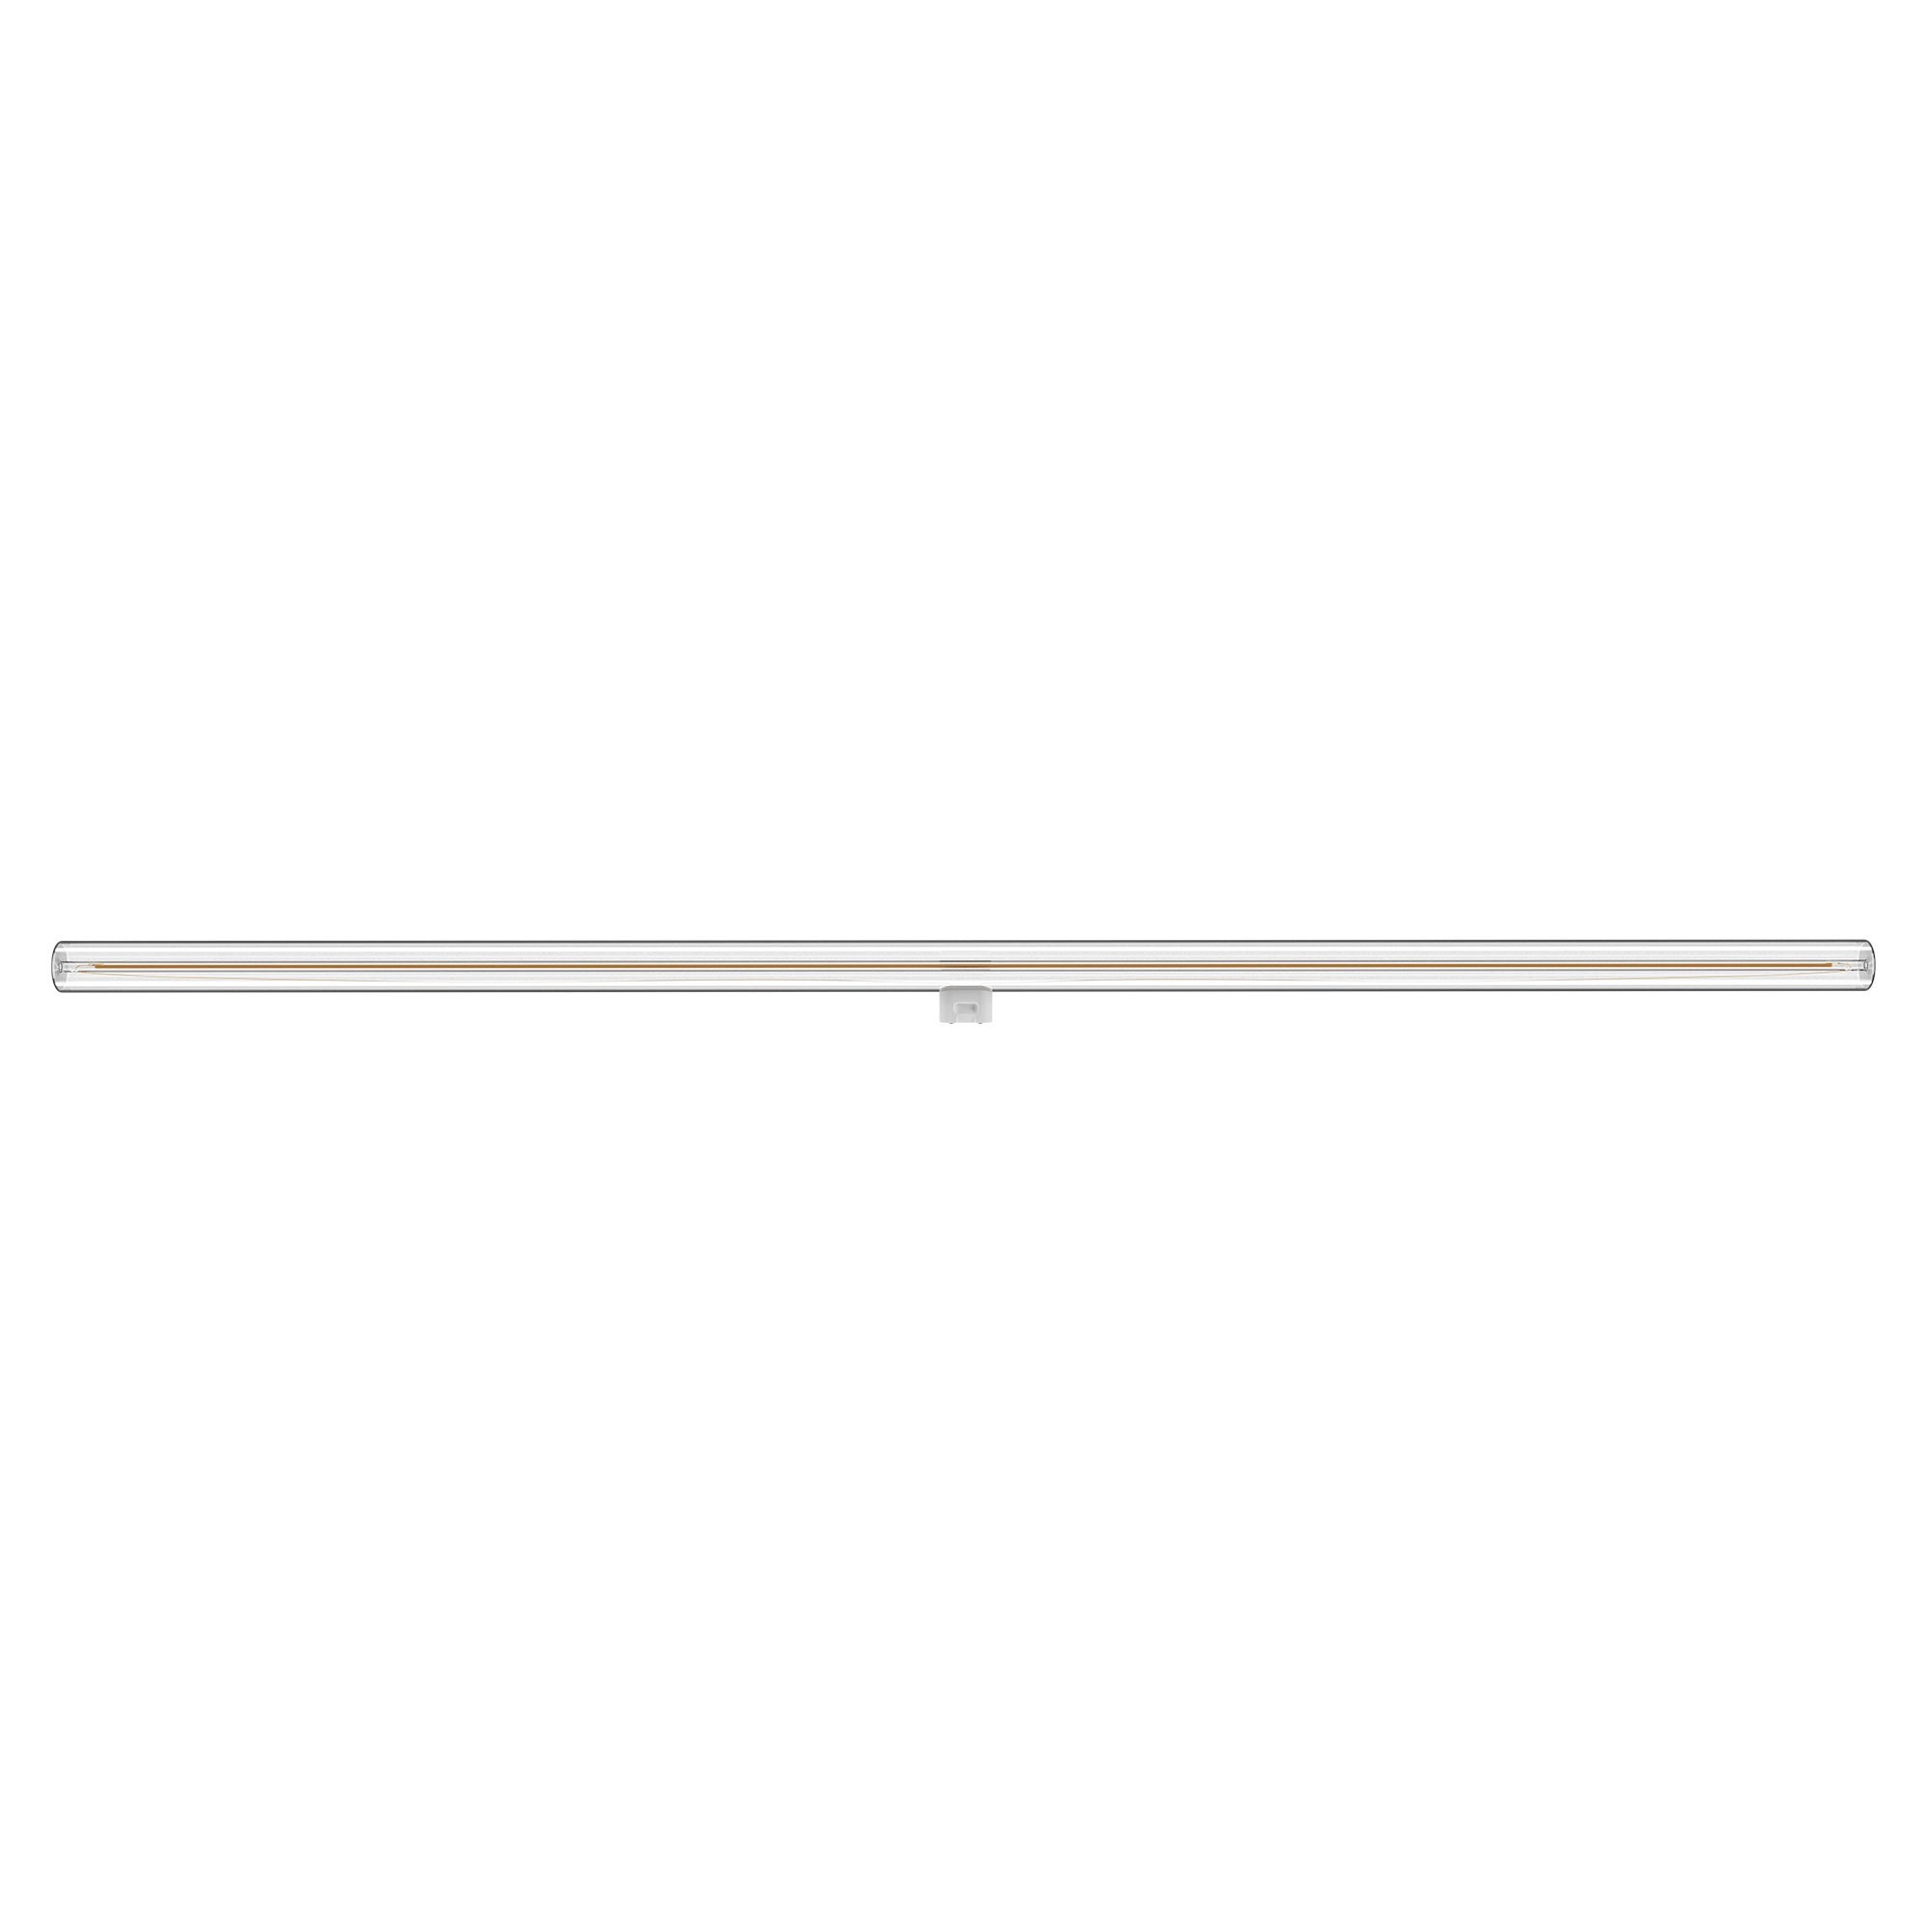 S03 - Linear LED light bulb L1000, S14d, 9W, 2700K, 760Lm, with clear glass